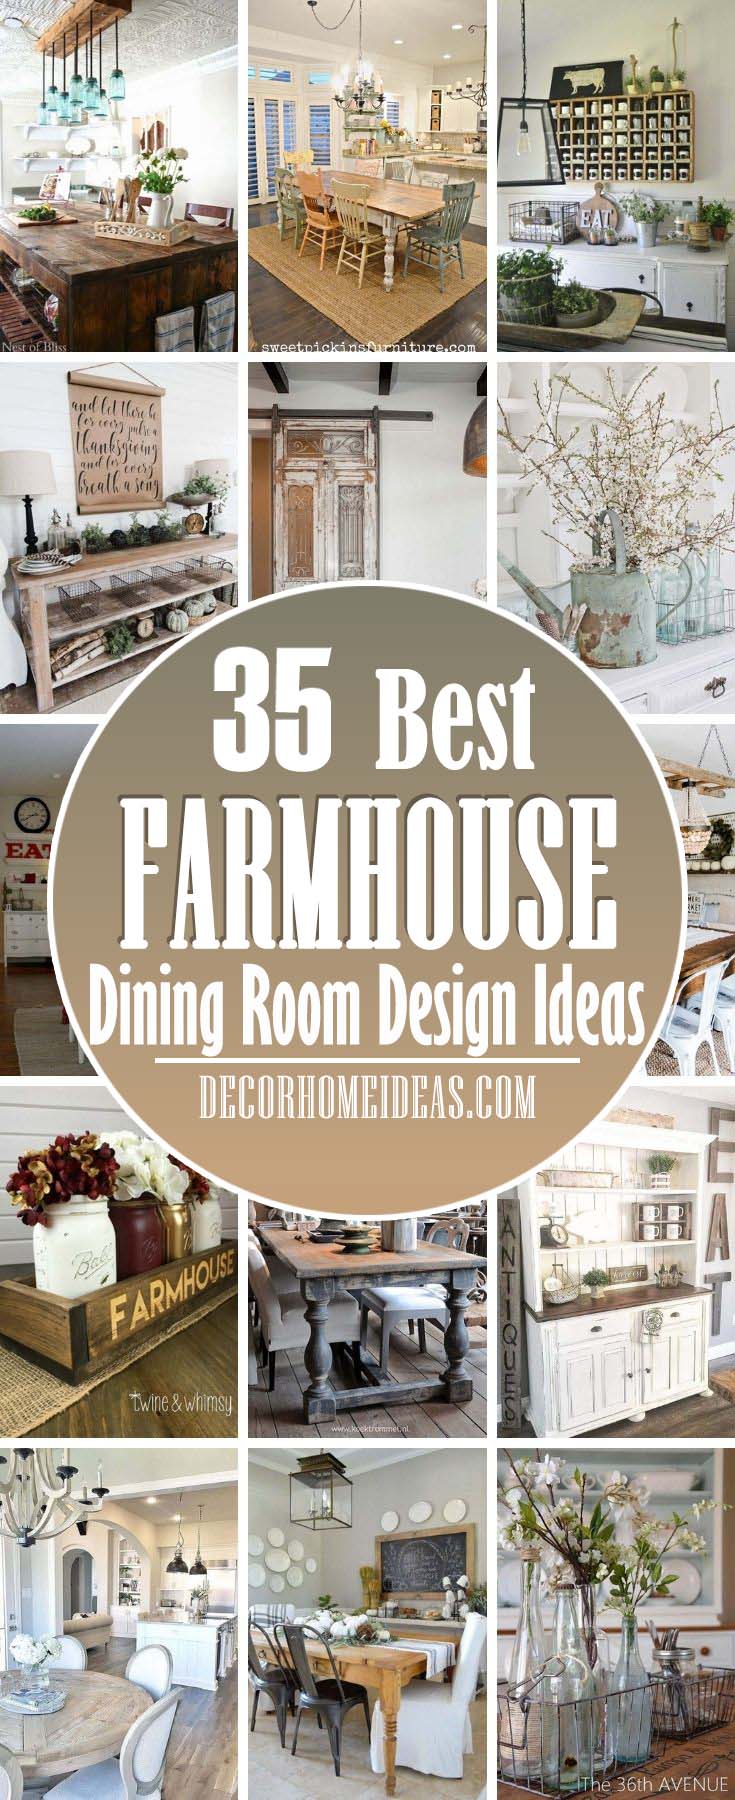 Best Farmhouse Dining Room Design And Decor Ideas. From weathered wood tables to spindle-back chairs, nothing says home sweet home better than a farmhouse dining room. Here's how to get the look. #decorhomeideas